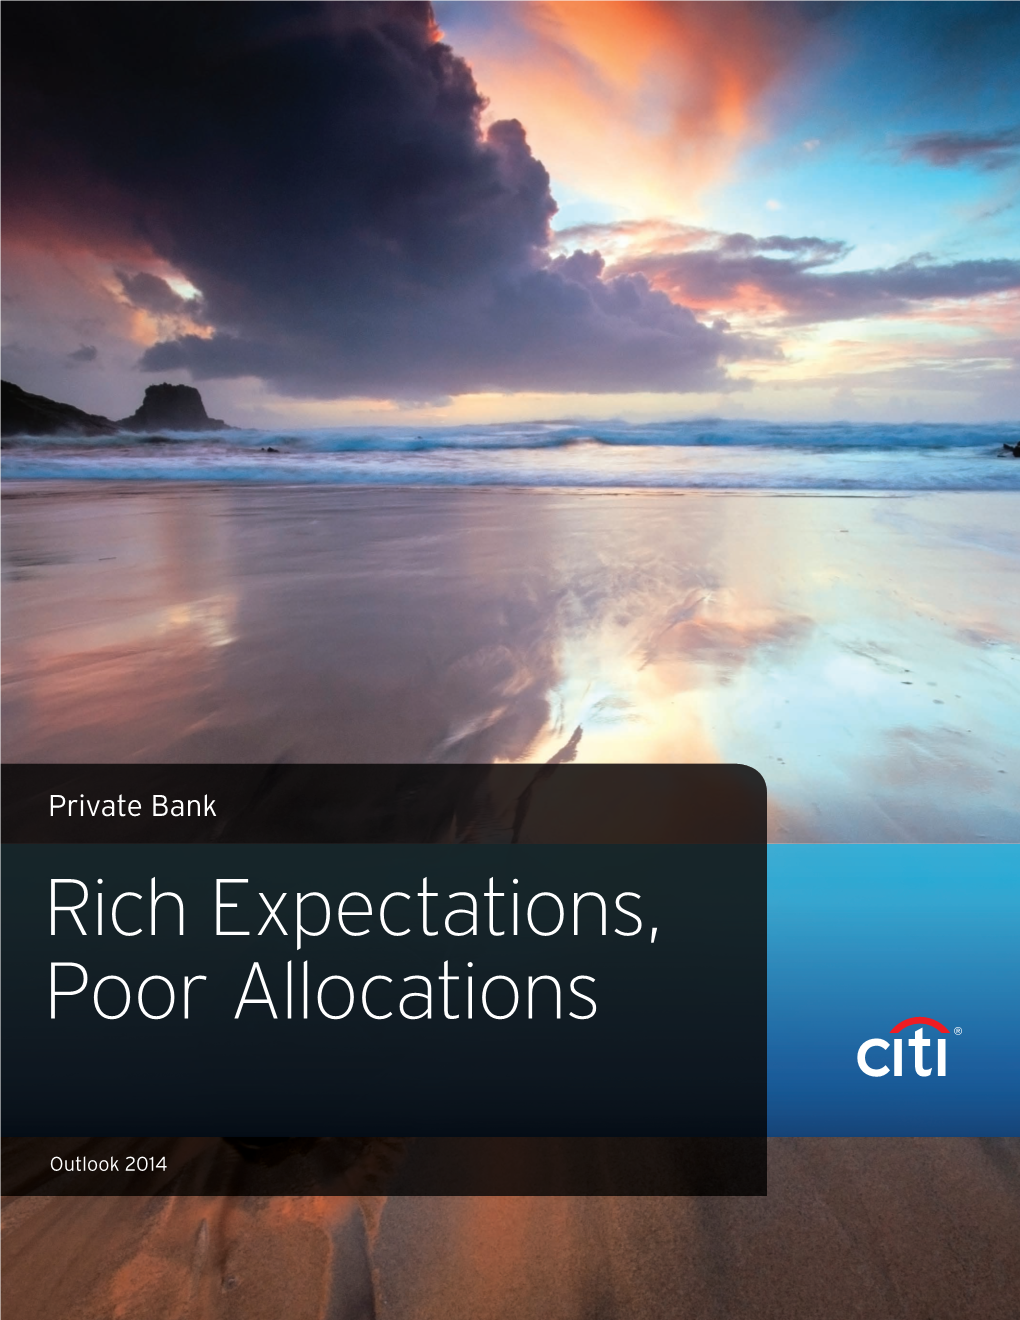 Rich Expectations, Poor Allocations